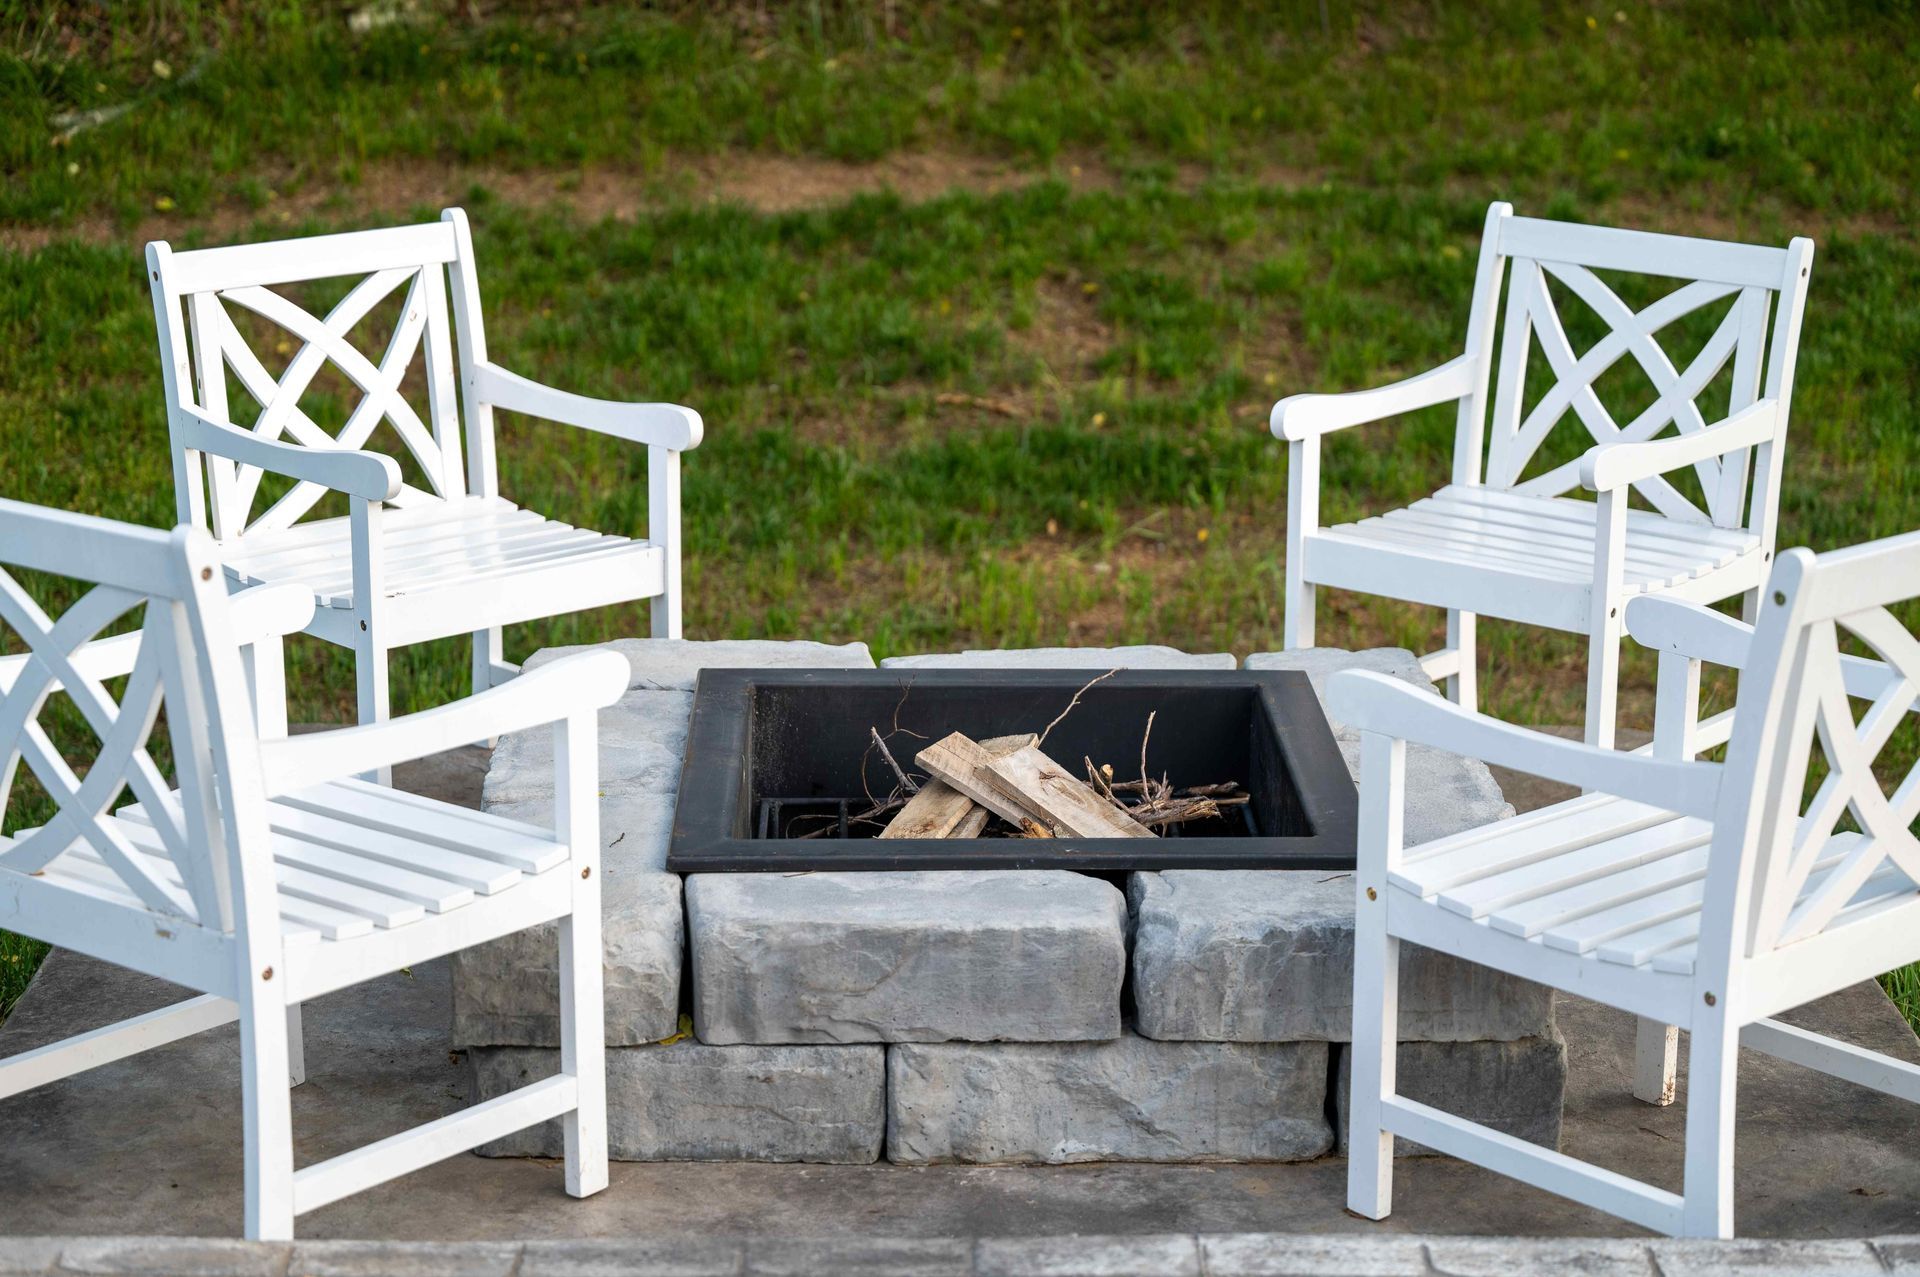 Backyard fire pit with four chairs surrounded by grass